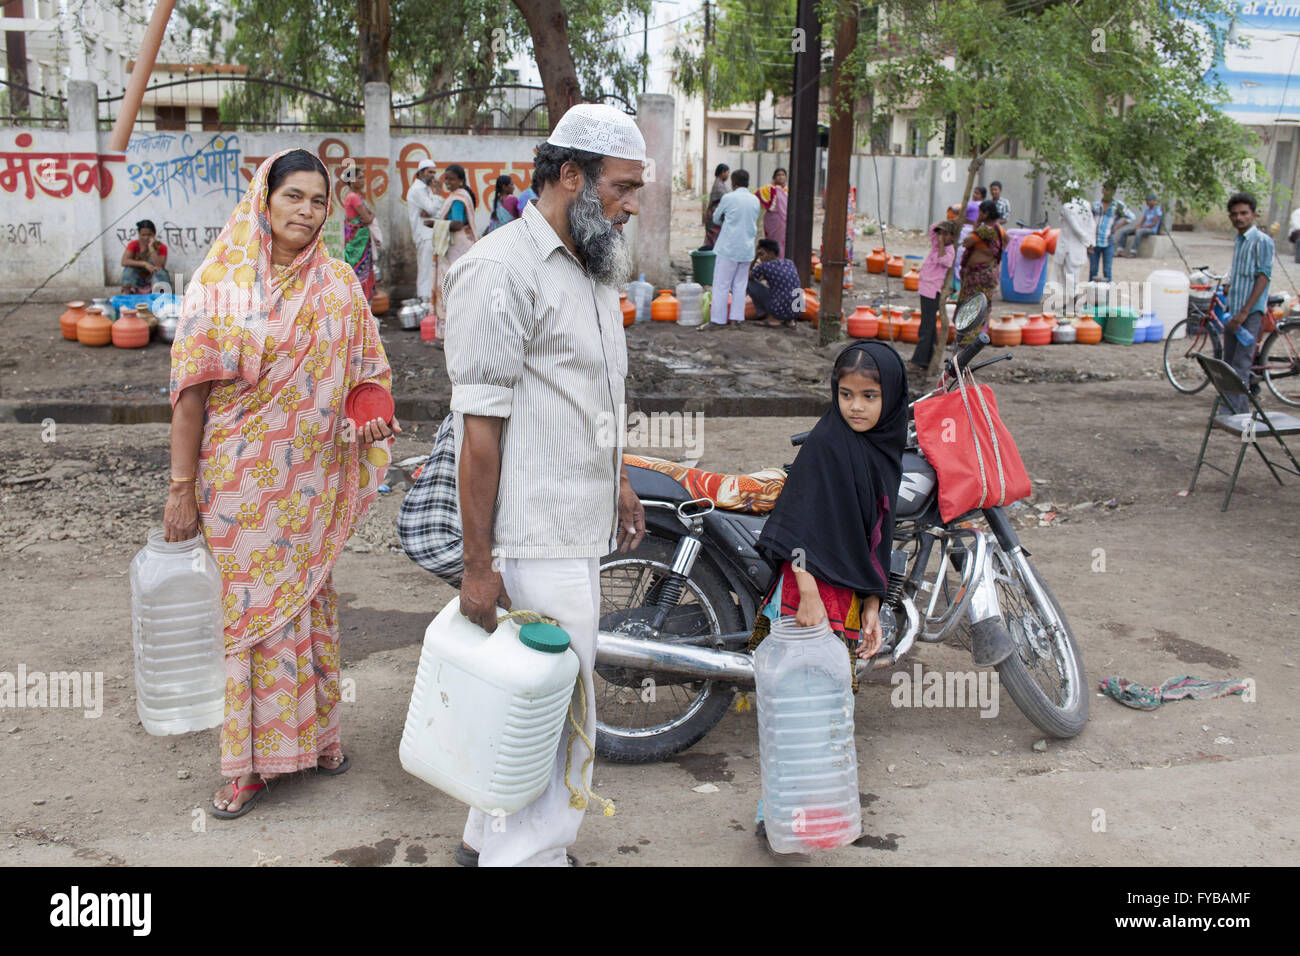 Latur, Maharashtra. 20th Apr, 2016. 20 April 2016 - Latur - INDIA.Unable to fetch water because of long queues Sayed Jafur, leaves a water tank in Latur on his motorbike, accompanied by his wife Khatumbi, and his 9-year-old granddaughter, Asha.Latur is part of the state's predominantly agricultural Marathwada region, where 273 farmers committed suicide between January and March this year.The area is among the worst affected by the drought and some families in Latur have left for cities such as the state capital Mumbai, nearly 500 kilometres away. In Latur town, there are huge queues at Stock Photo